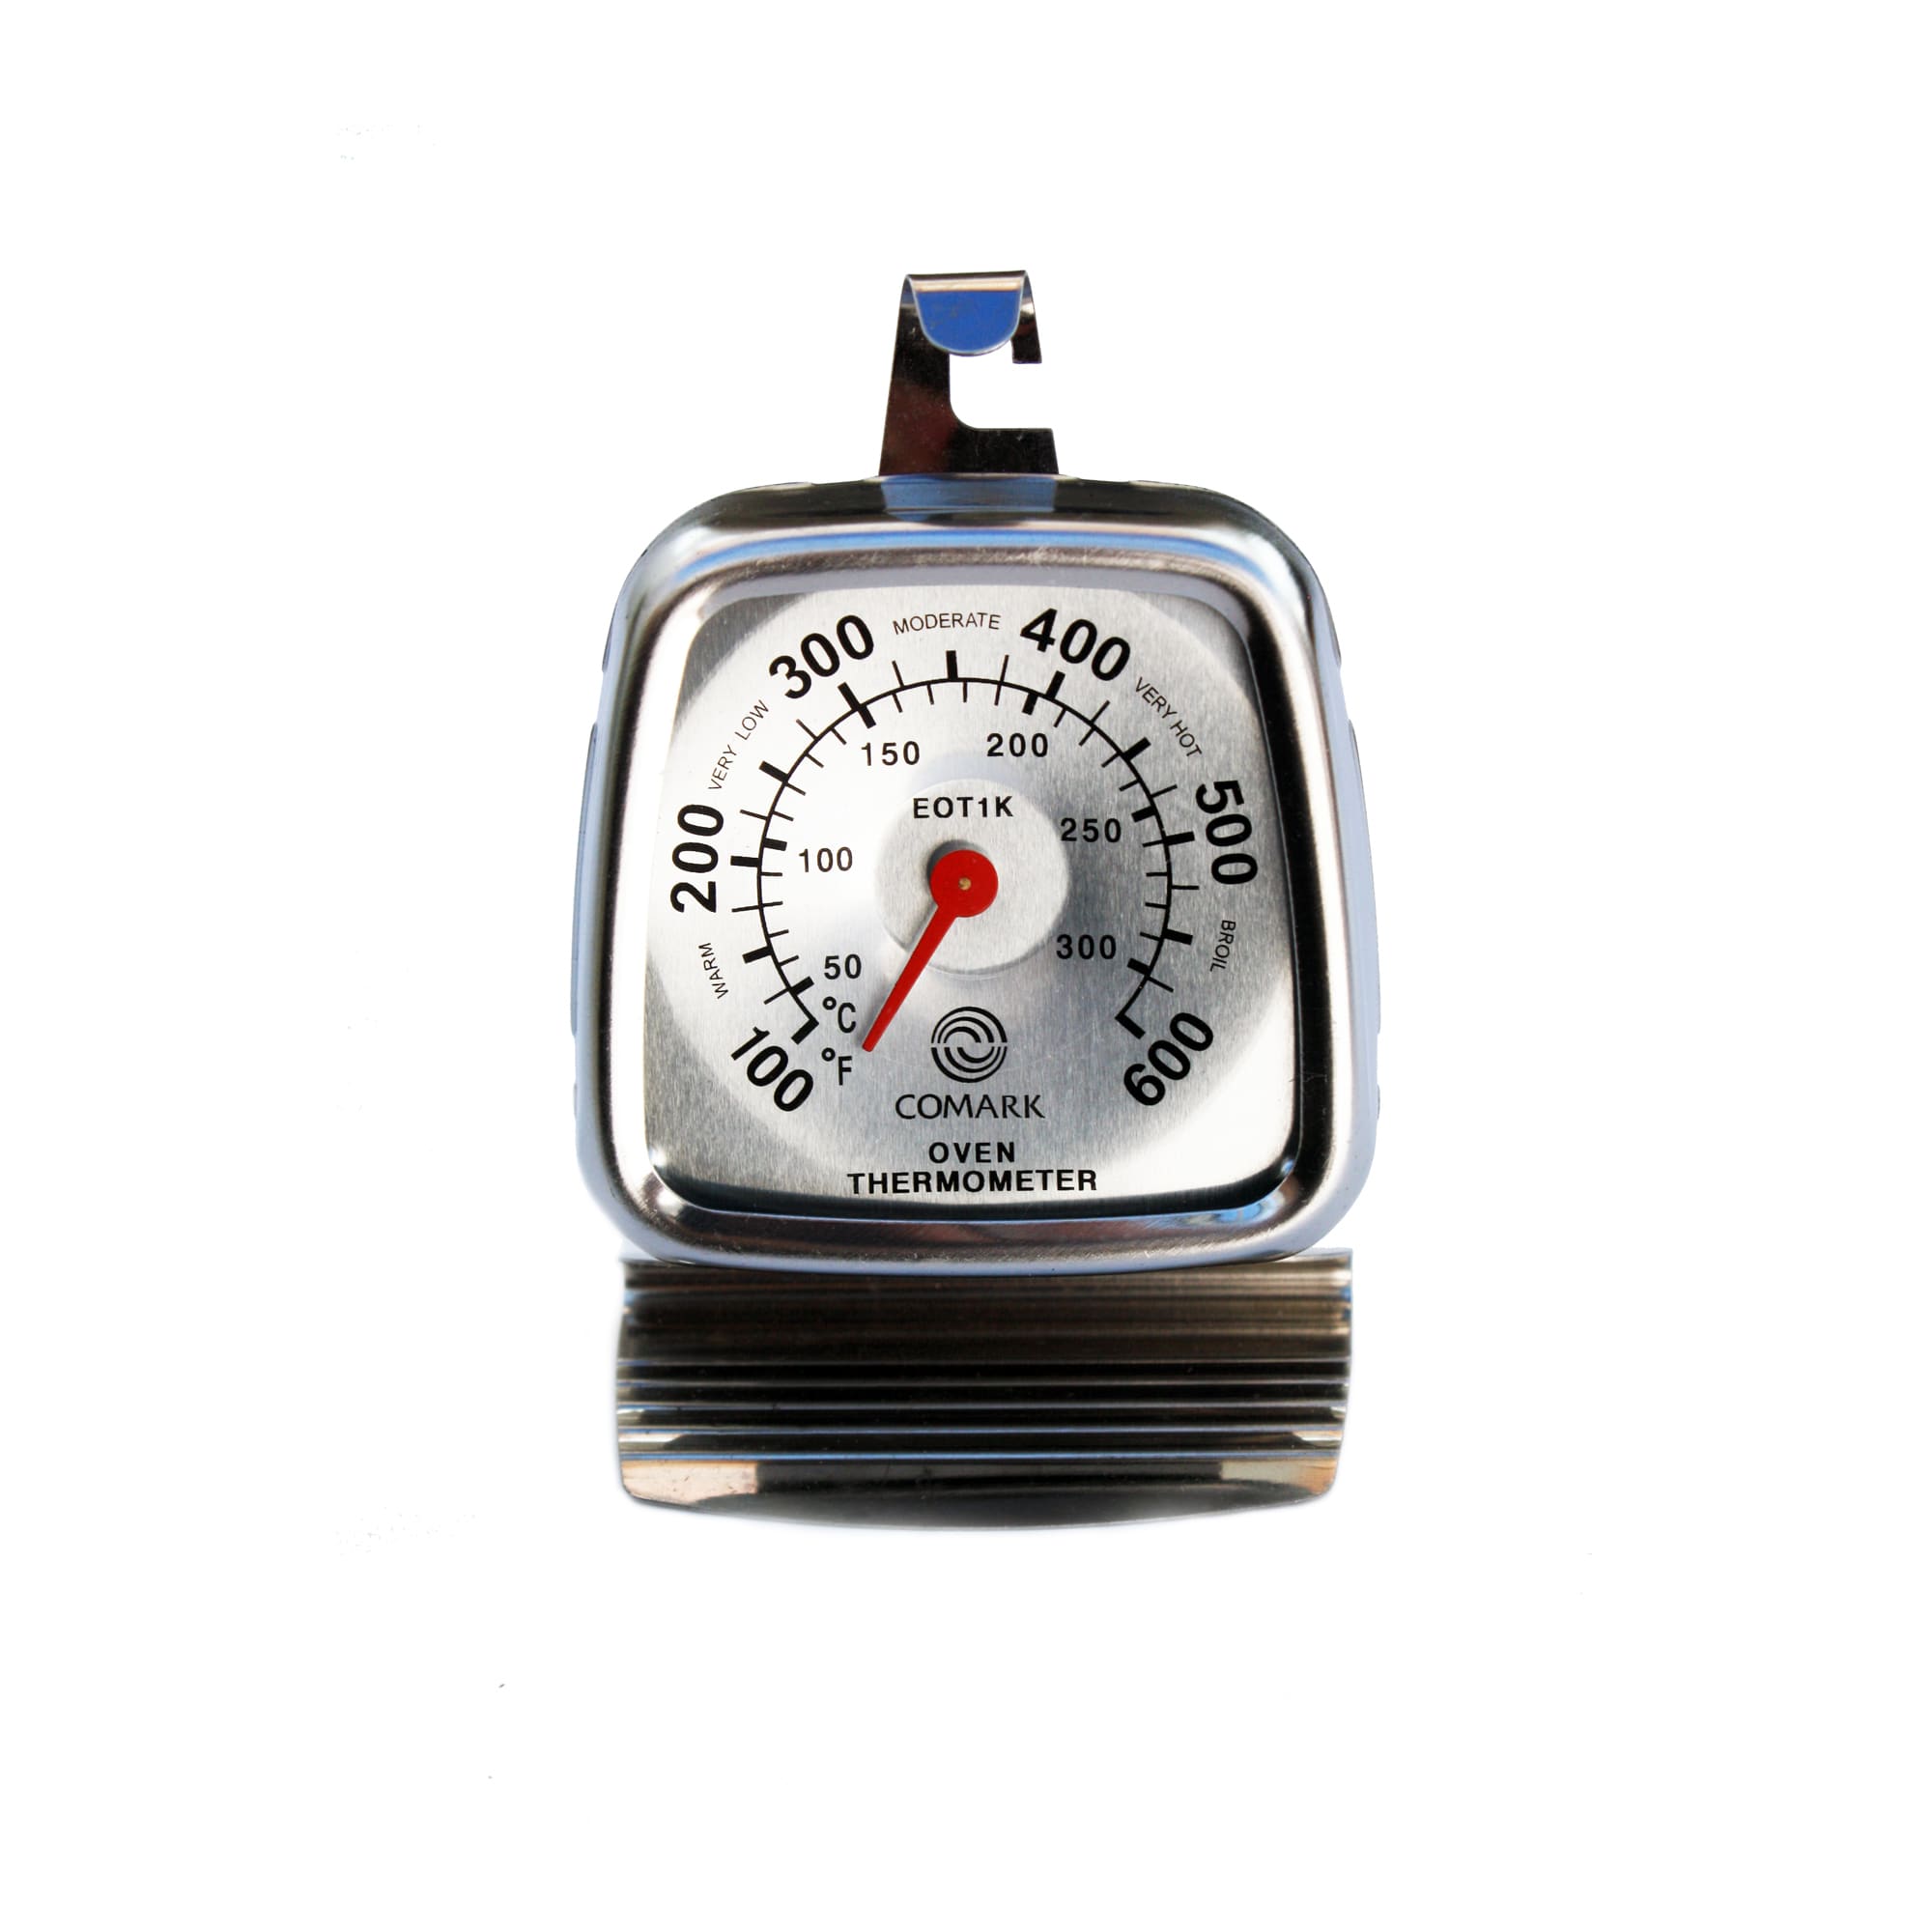 Comark EOT1K Economy Oven Thermometer - image 1 of 4